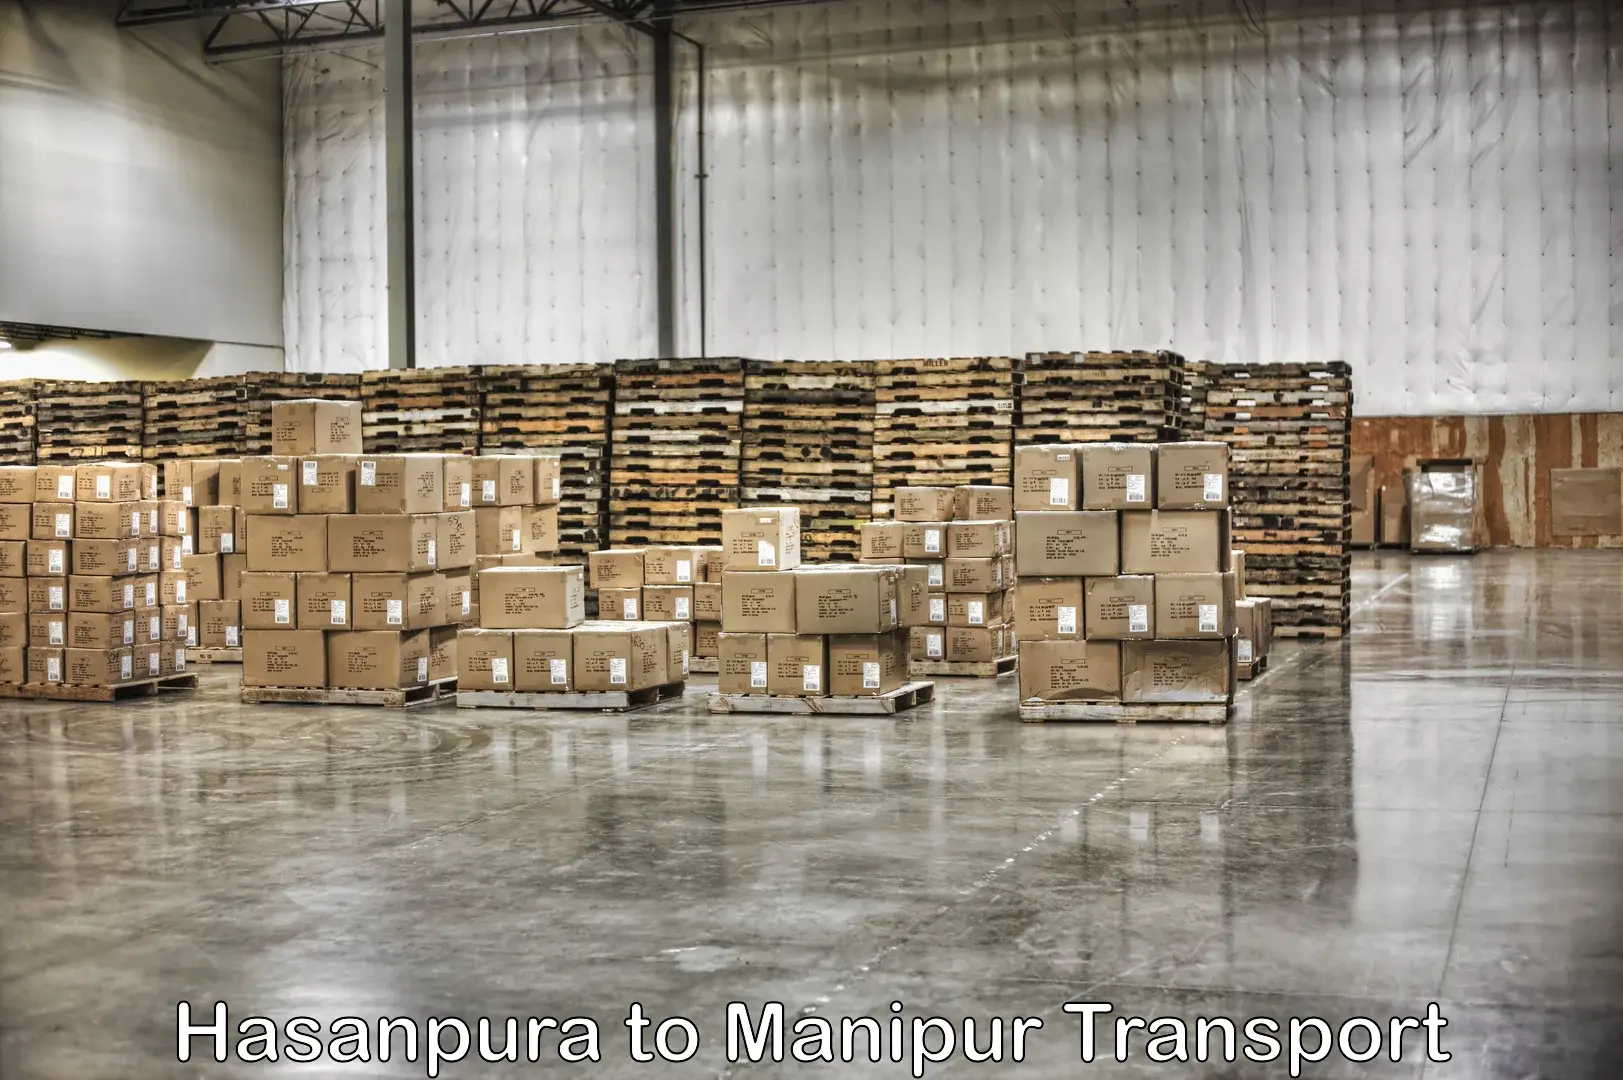 Delivery service Hasanpura to Manipur